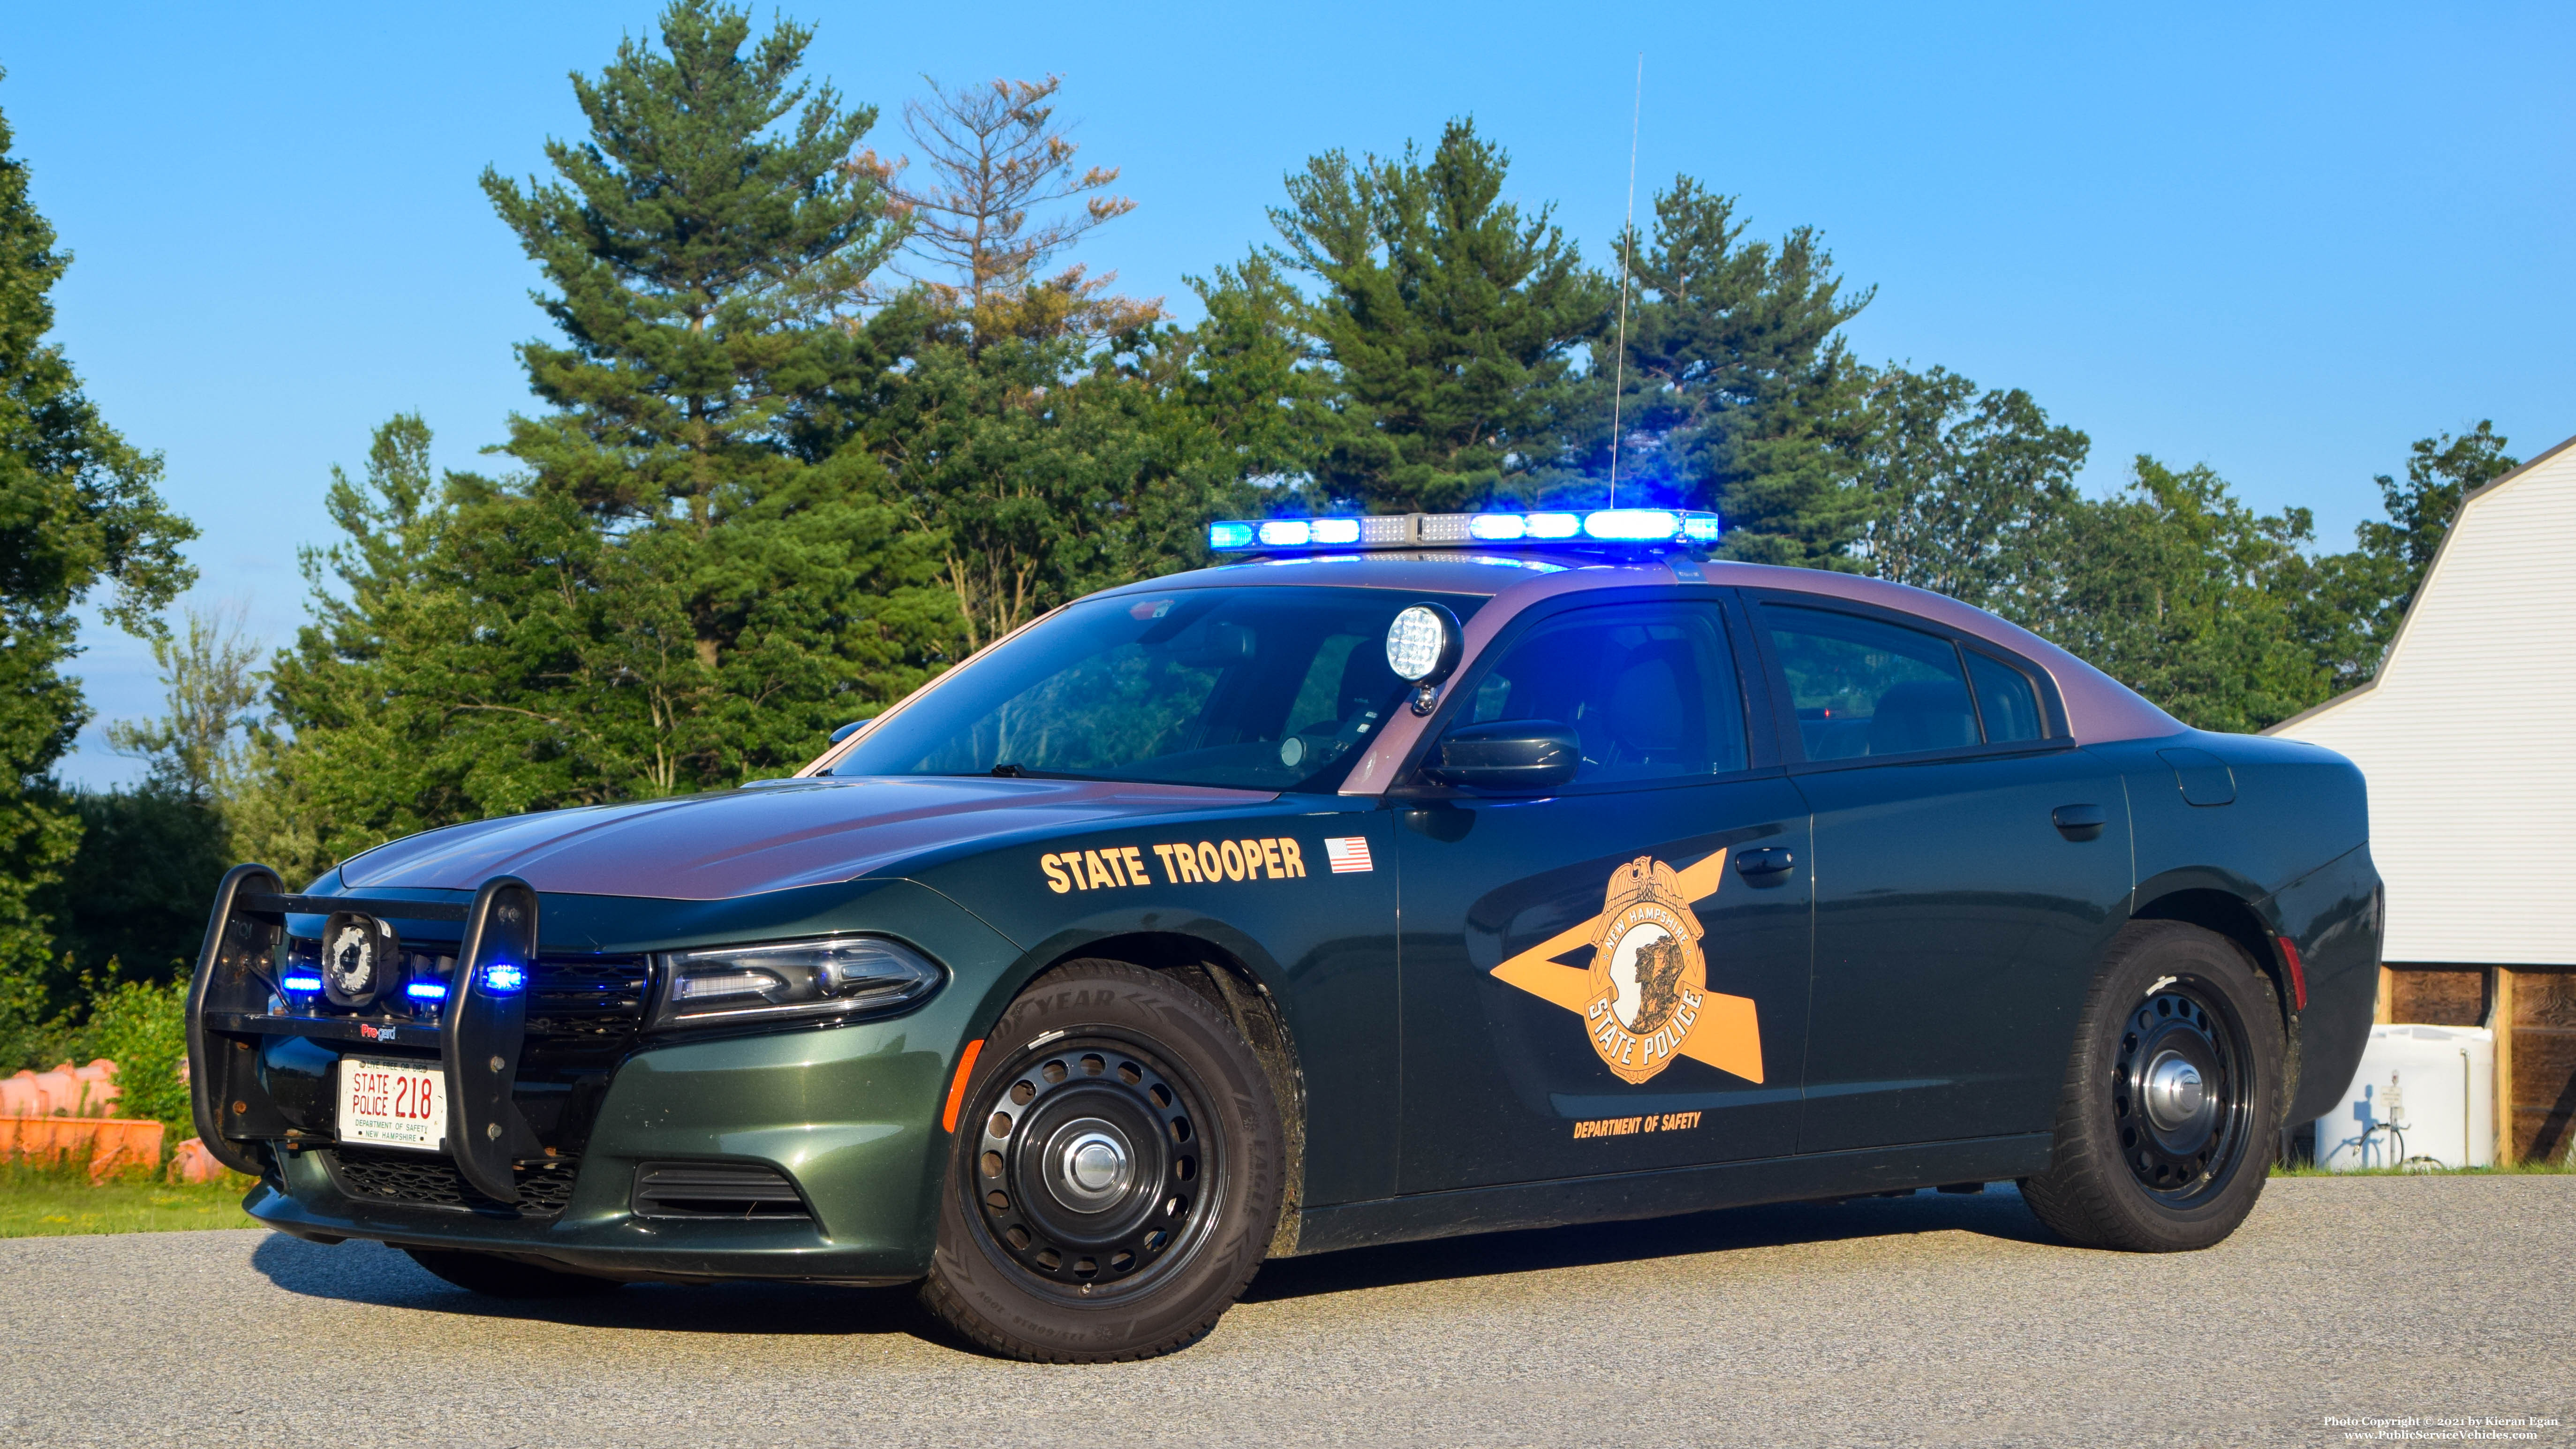 A photo  of New Hampshire State Police
            Cruiser 218, a 2015-2016 Dodge Charger             taken by Kieran Egan